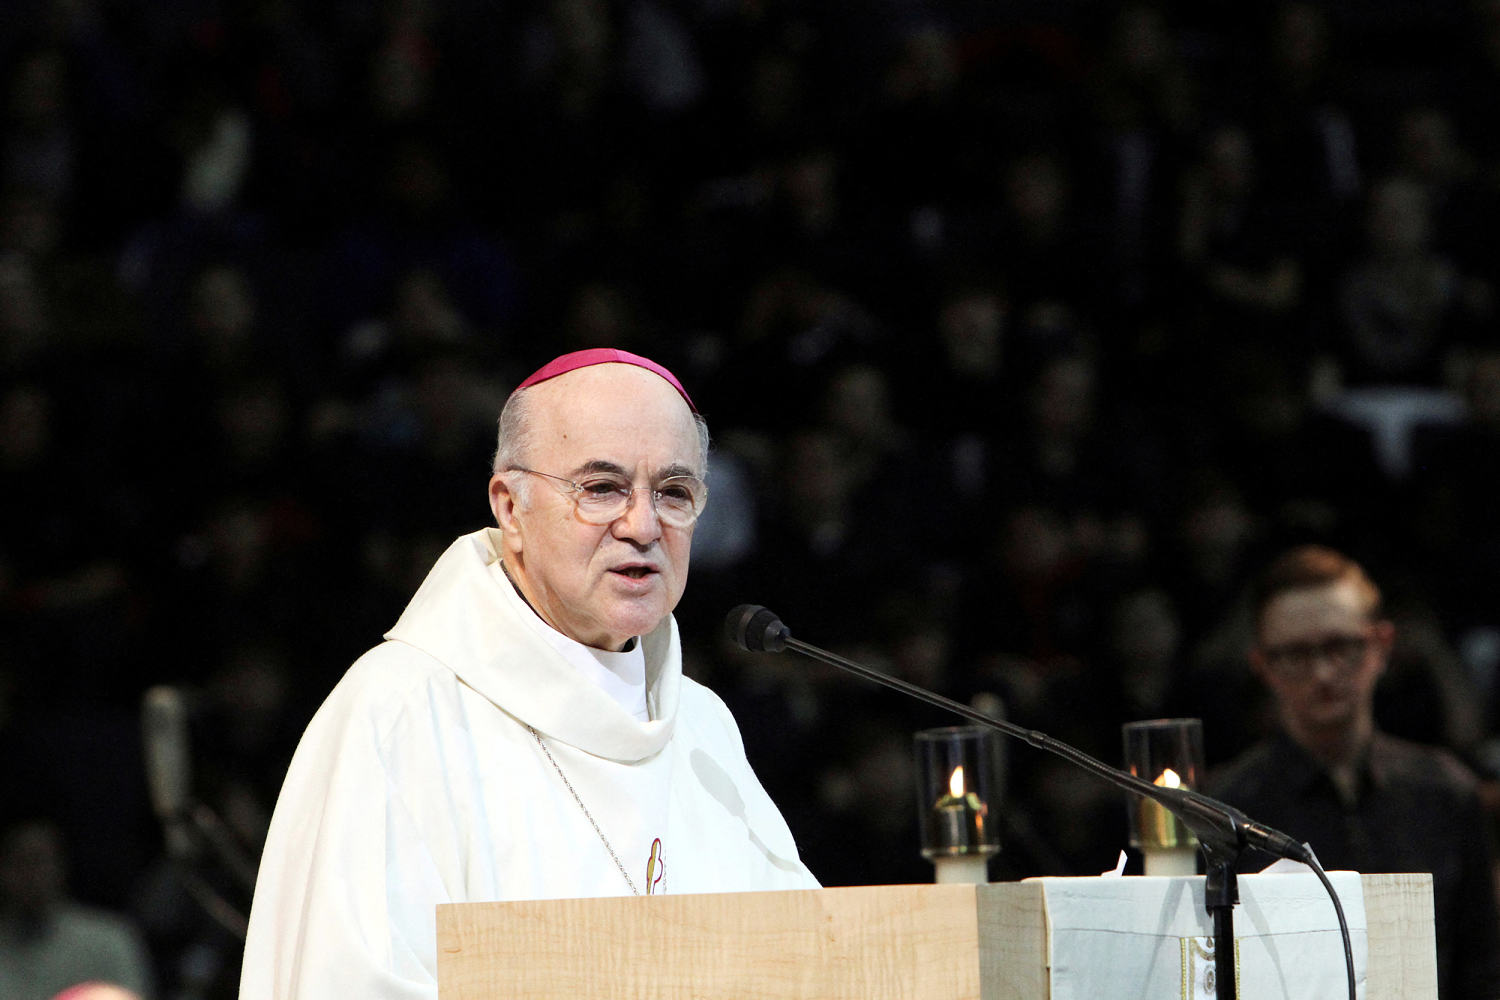 Papal arch enemy Archbishop Vigano found guilty of schism and excommunicated